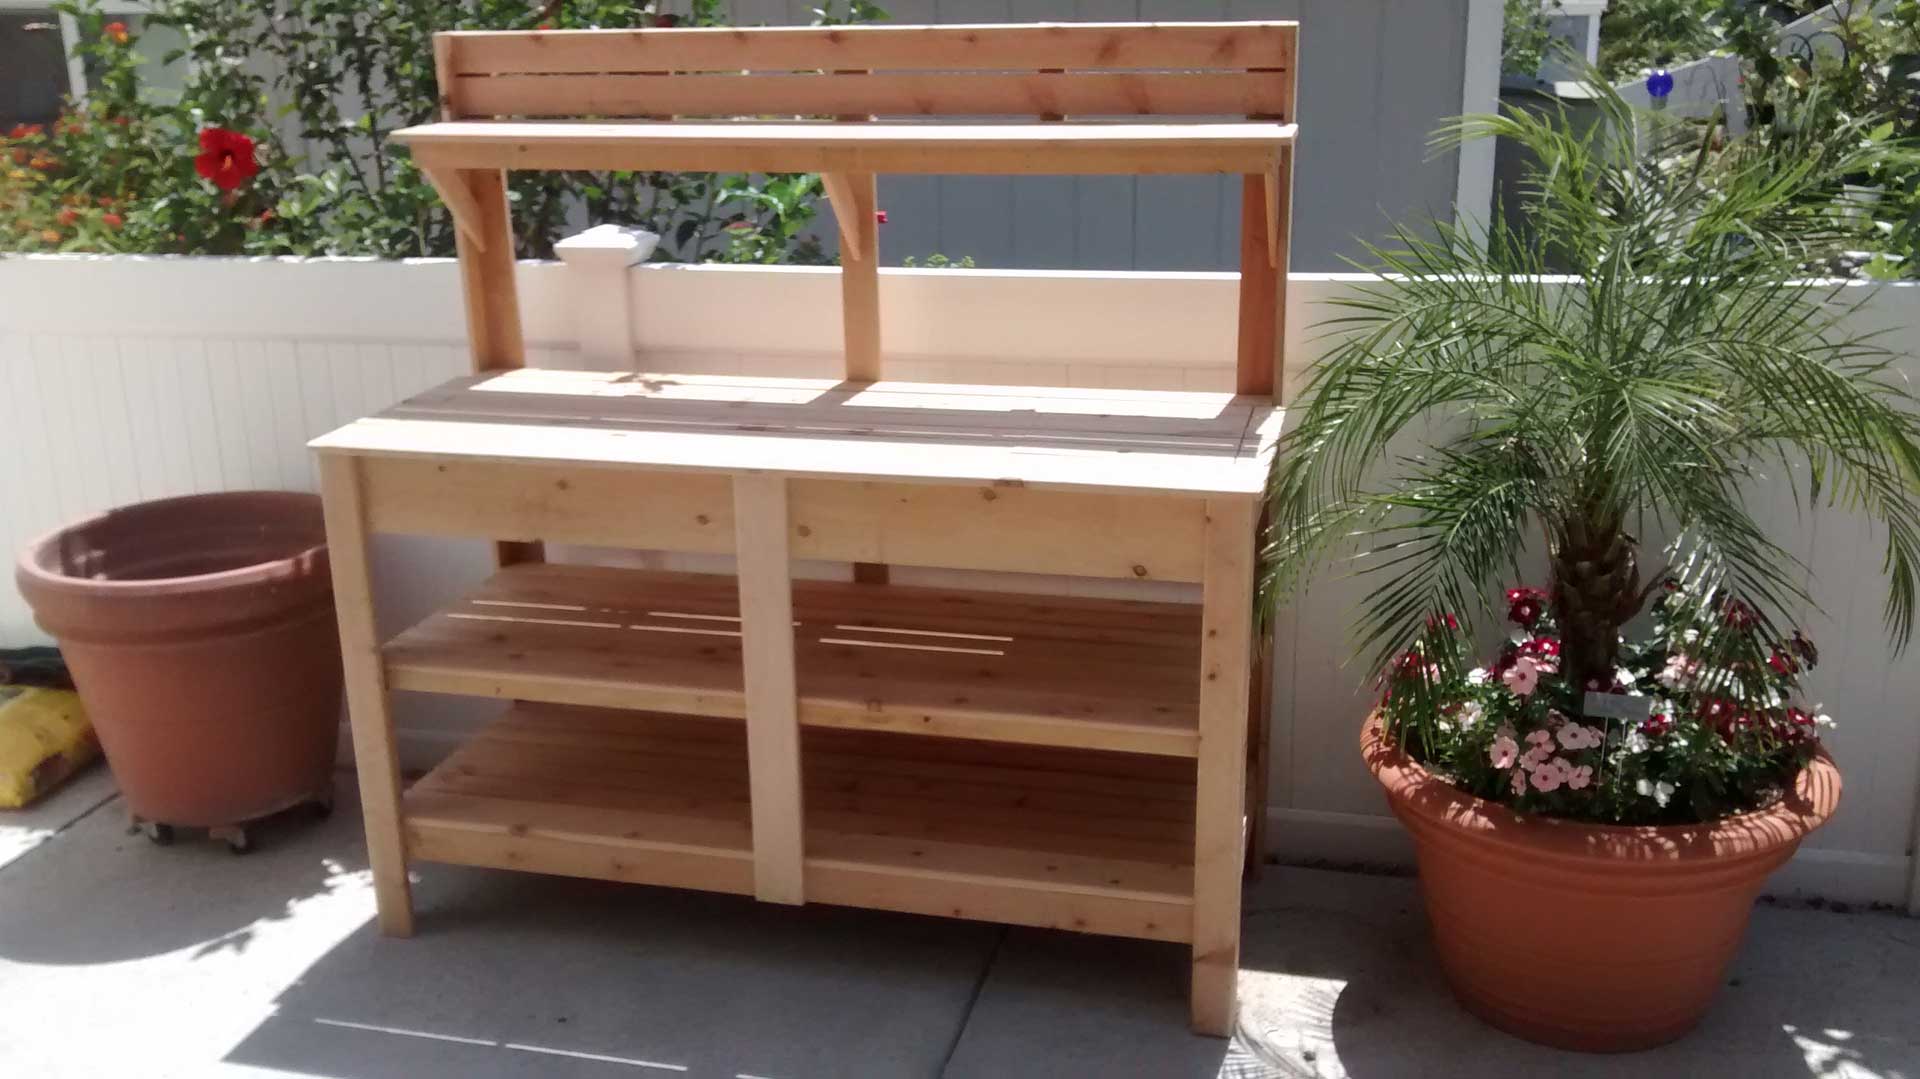 A wooden potting bench with potted plants on it.